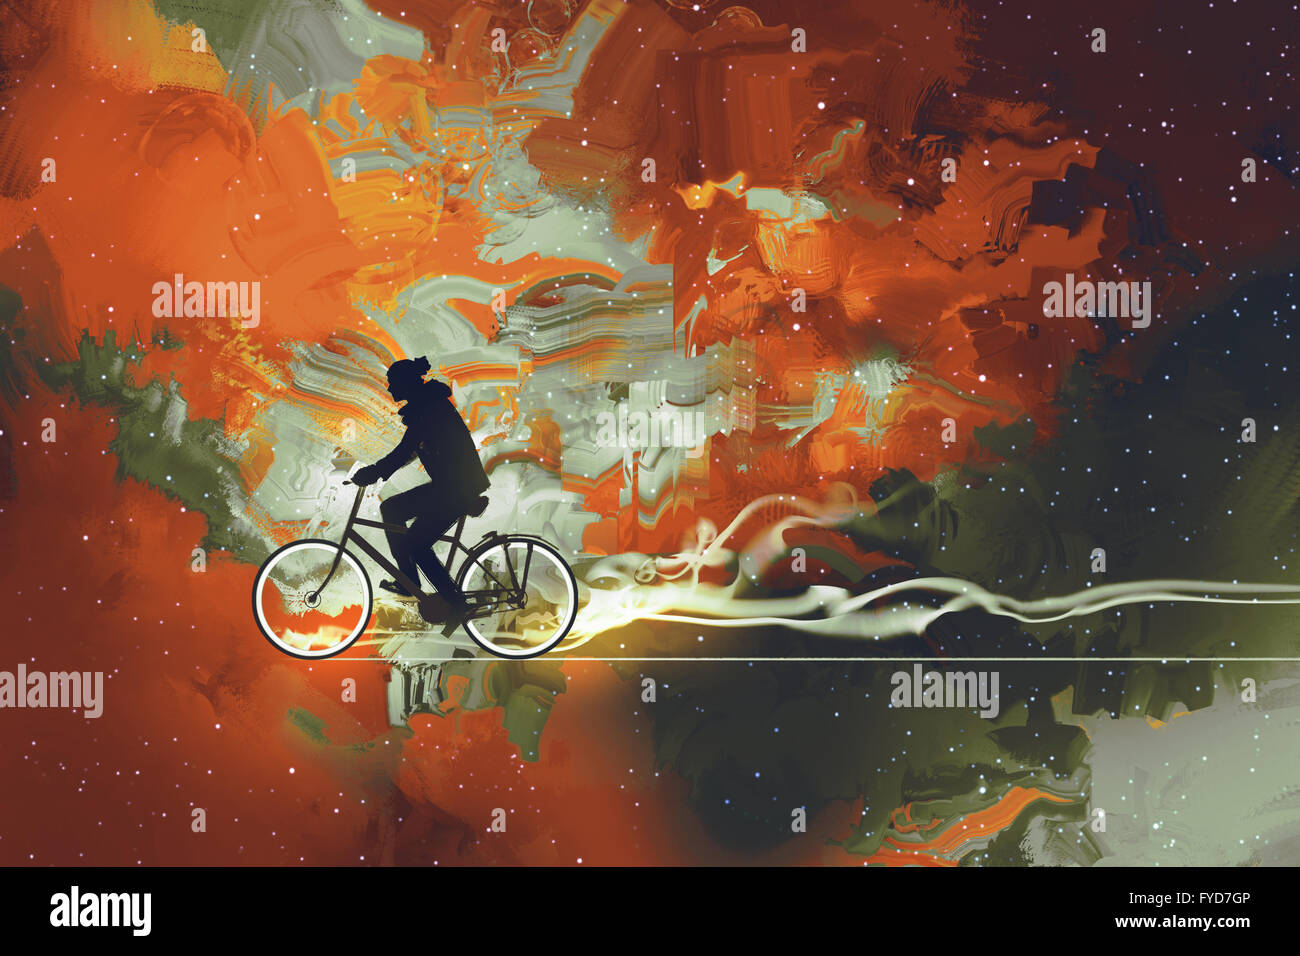 Silhouettes of man on bicycle in universe filled,illustration art Stock Photo